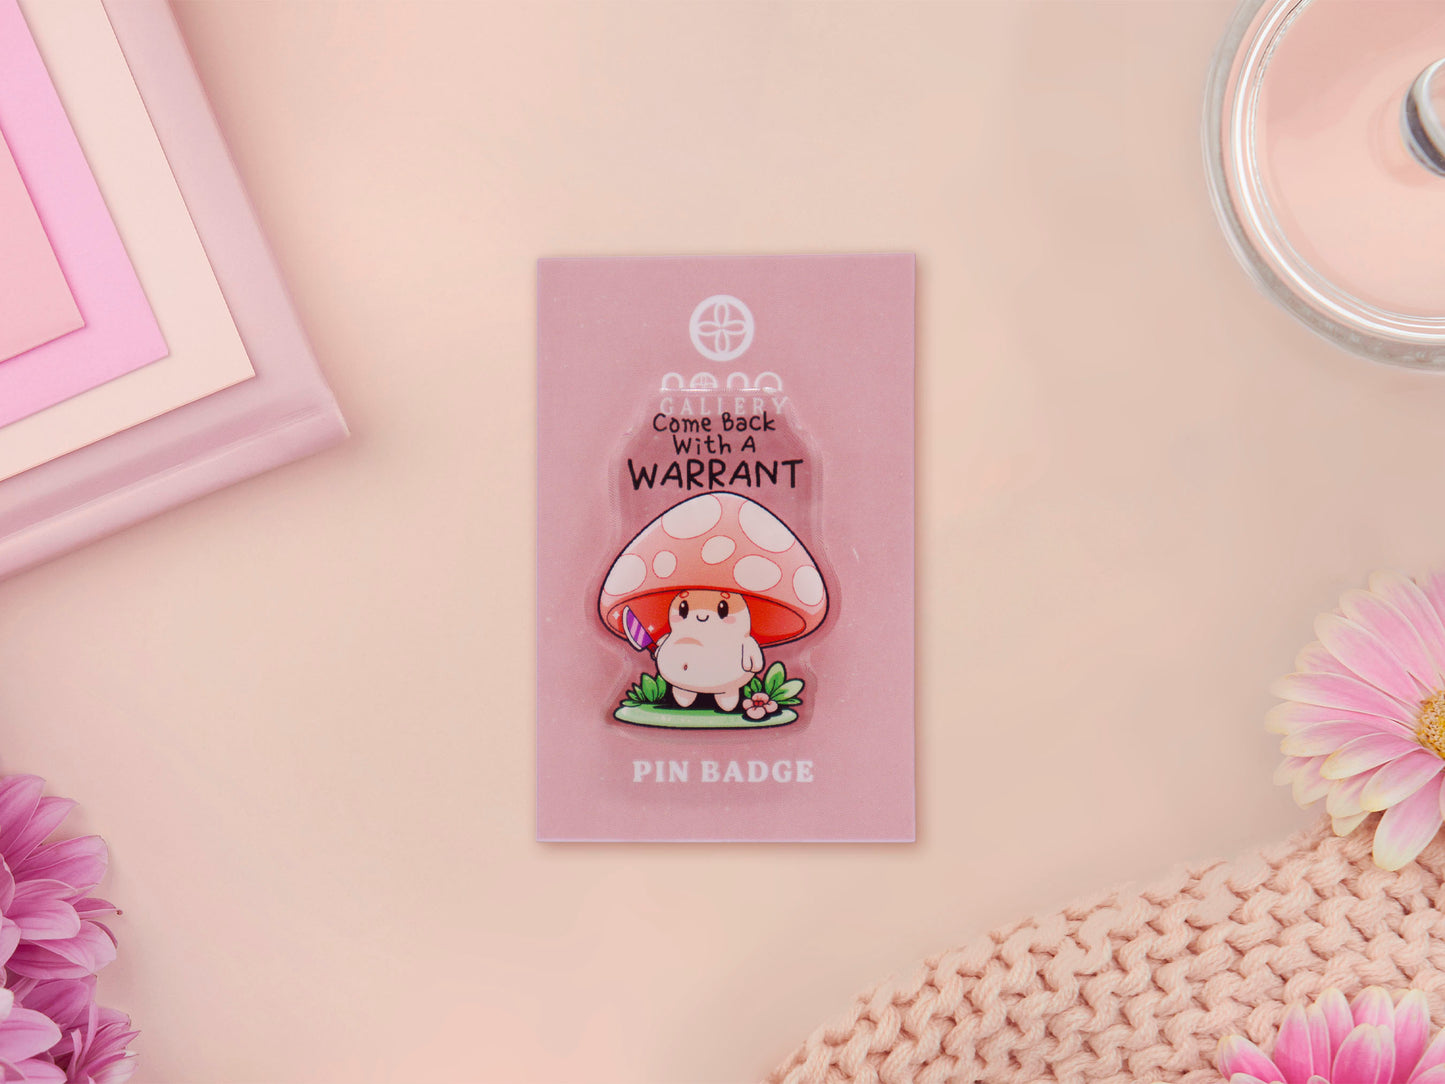 Acrylic Pin Badge on backing card of a smiling but ominous mushroom chibi with the quote come back with a warrant written above.